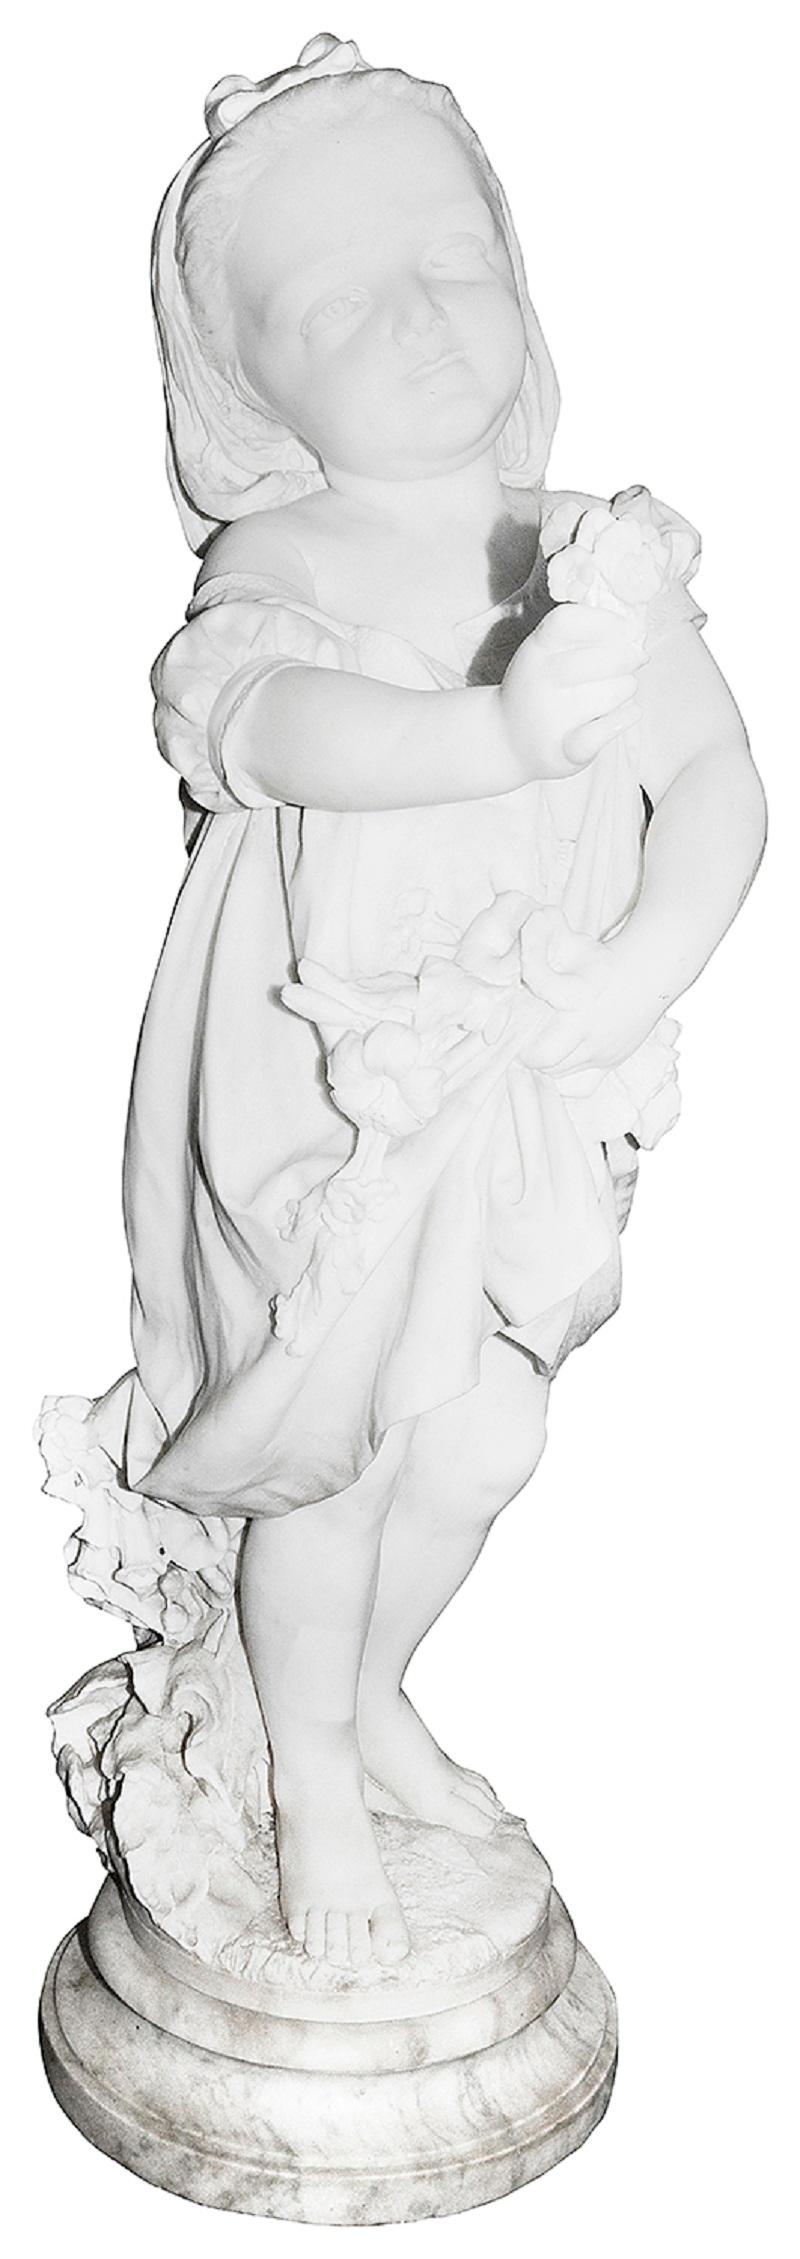 A fine quality 19th Century Carrera Marble statue of a young girl holding a flower, wearing a pretty dress and smiling.
Signed to the base; P. DELLA VEDOVA 1870
PIETRO DELLA VEDOVA (ITALIAN, 1831-1899):

Batch 78 AYZZN 55907


Batch 78